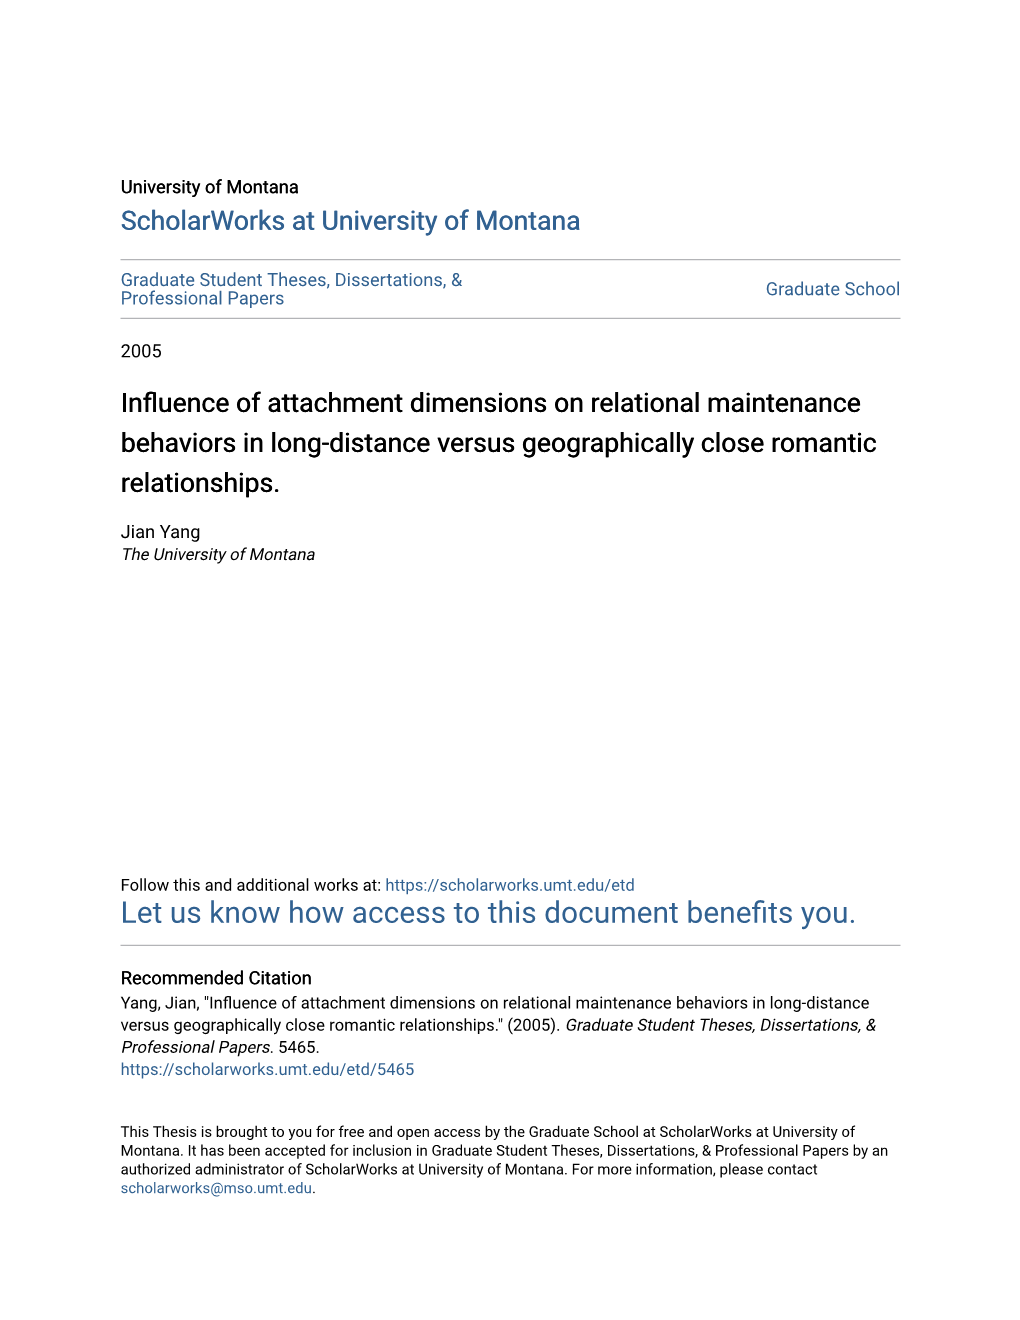 Influence of Attachment Dimensions on Relational Maintenance Behaviors in Long- Distance Versus Geographically Close Romantic Relationships